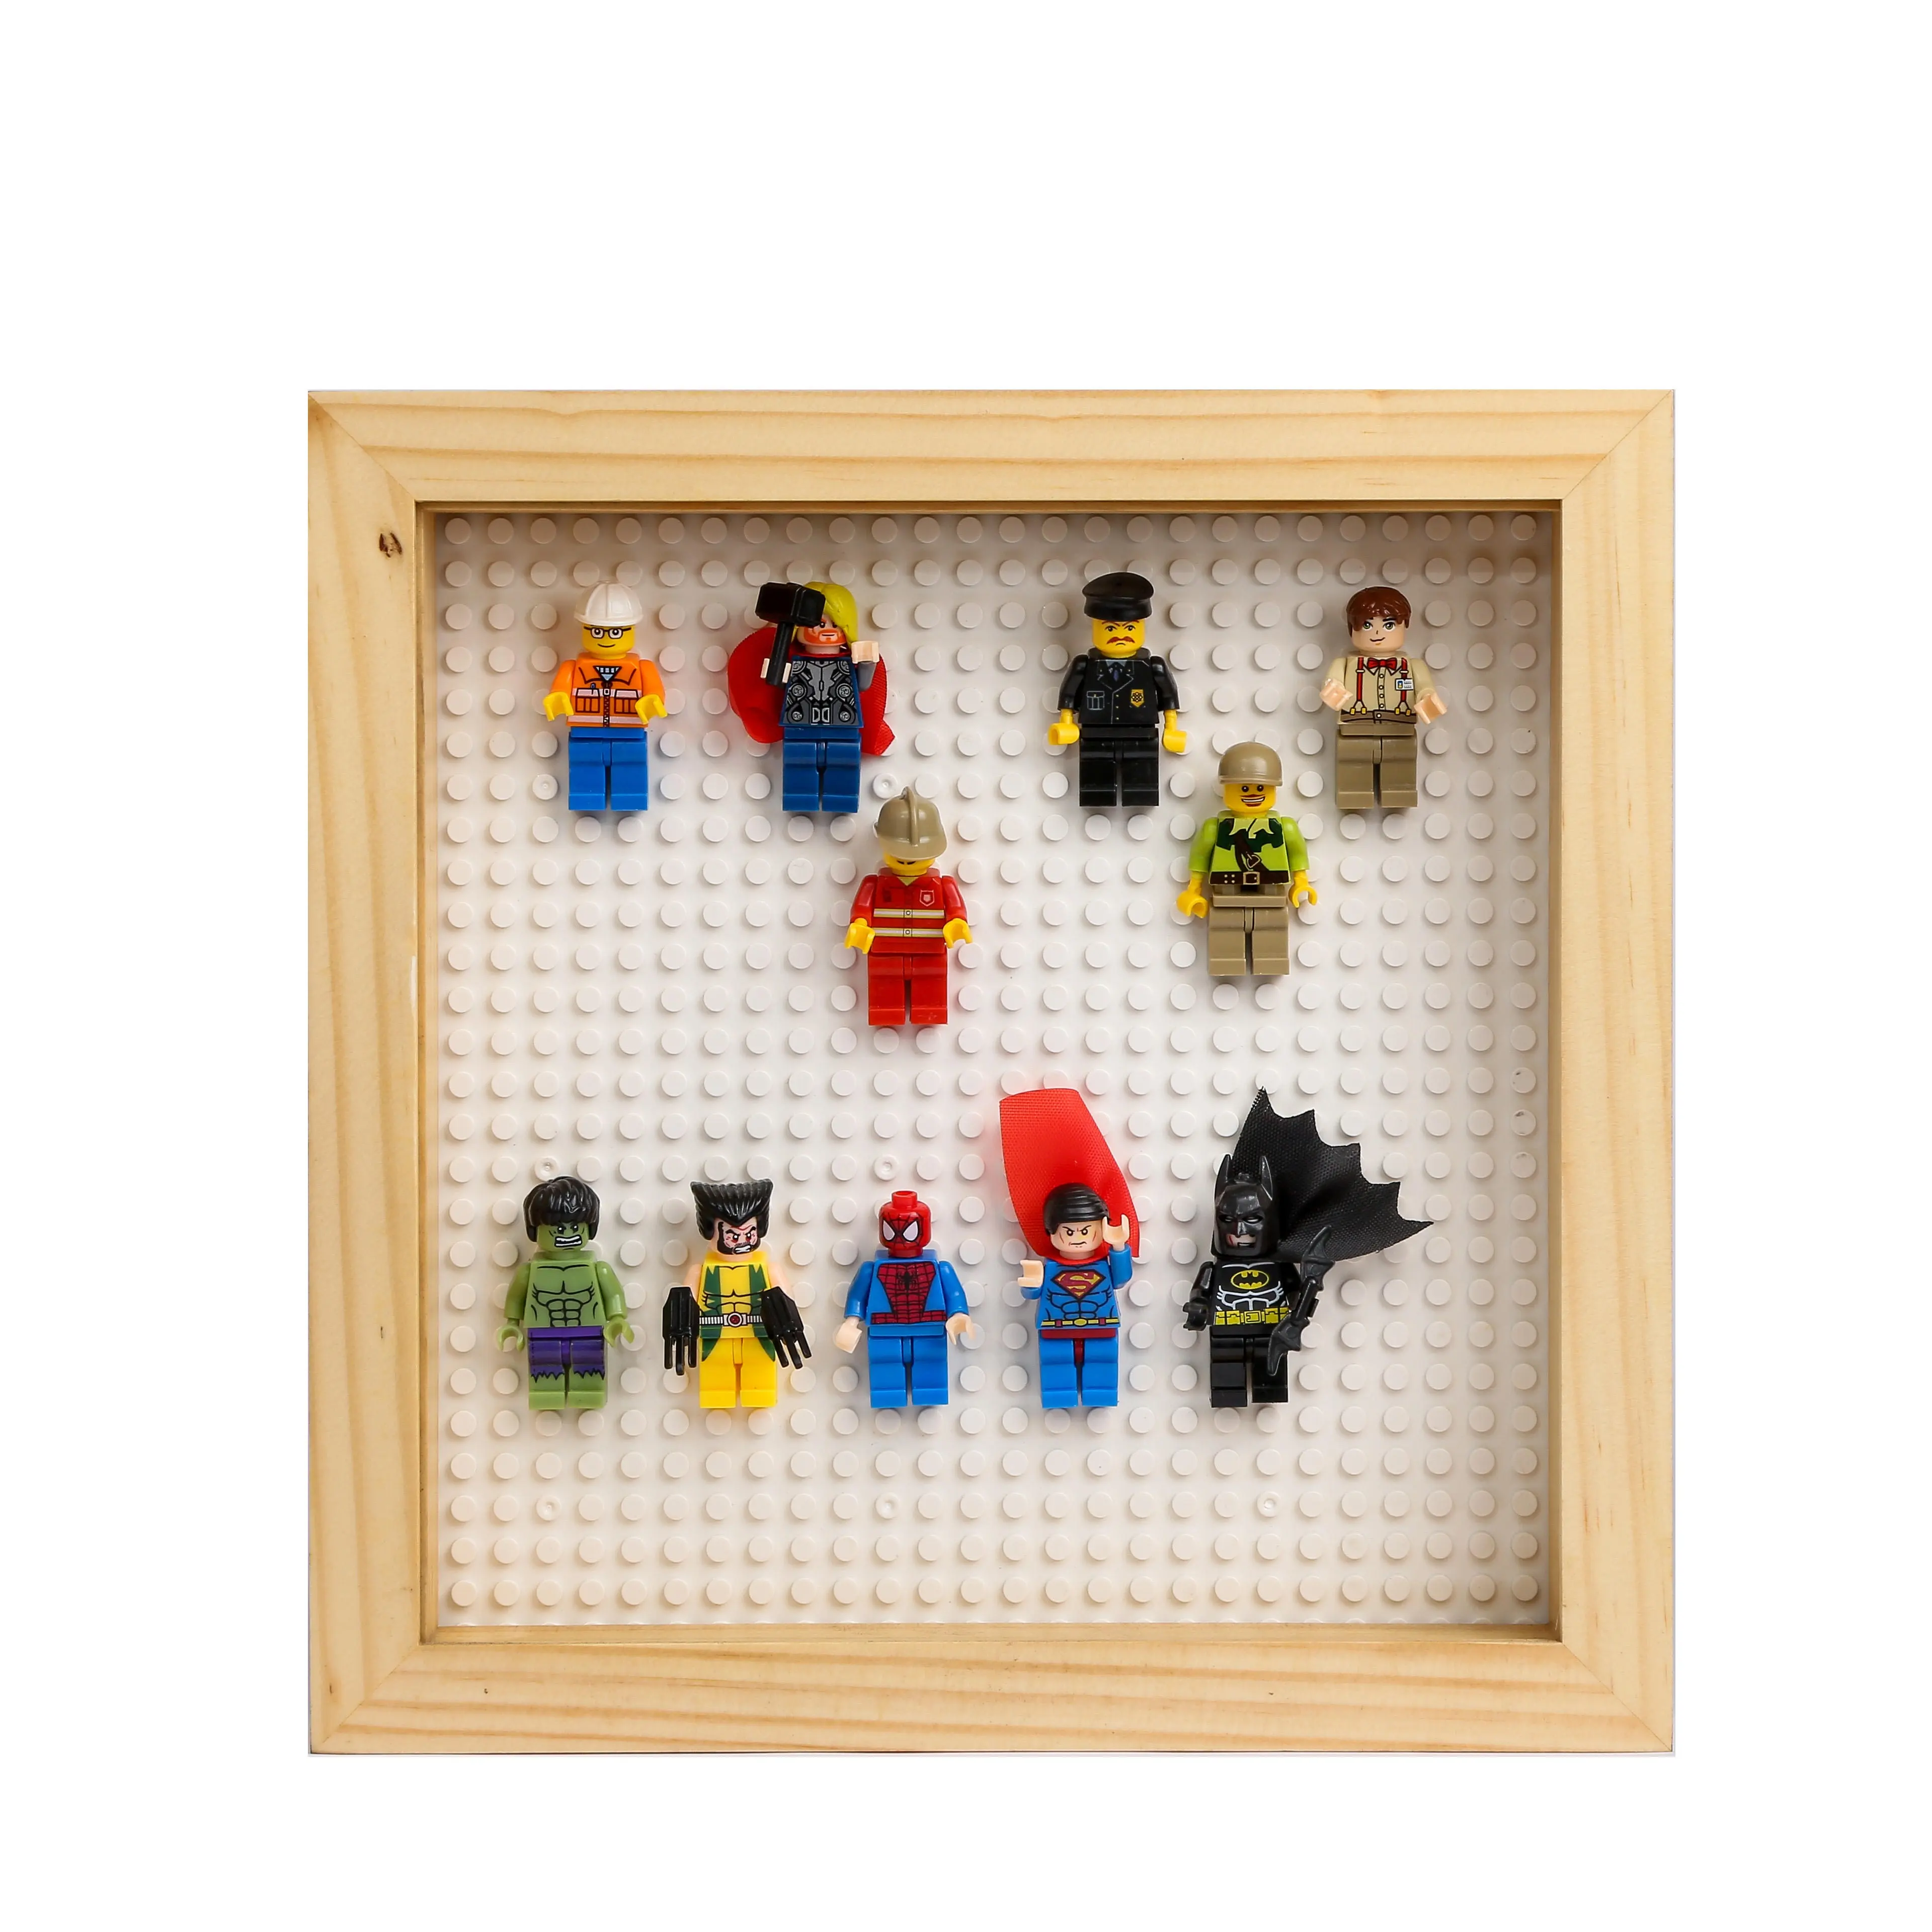 Factory direct sales of Lego frame 8inches square Shadow Box photo frame Lego frame Great For Tabletop Display Or Wall Mounted